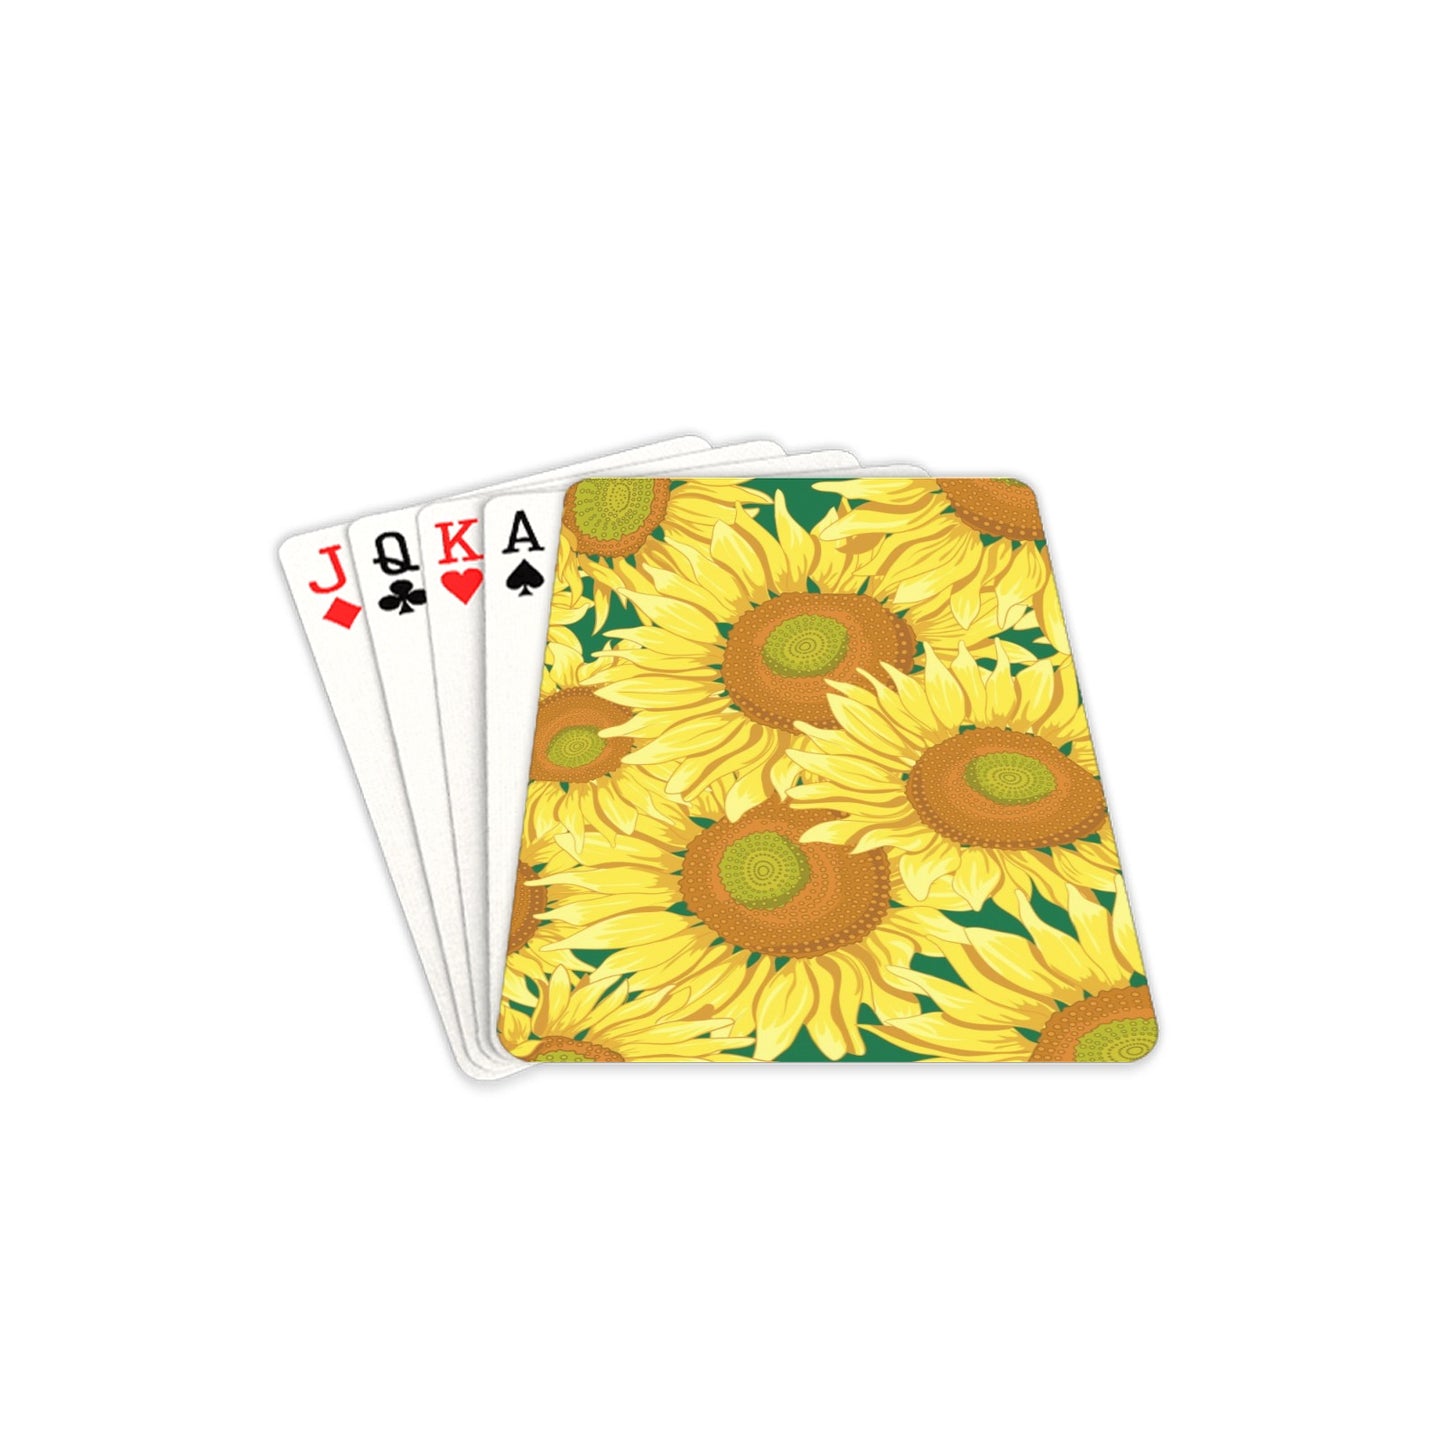 Sunflowers - Playing Cards 2.5"x3.5" Playing Card 2.5"x3.5"